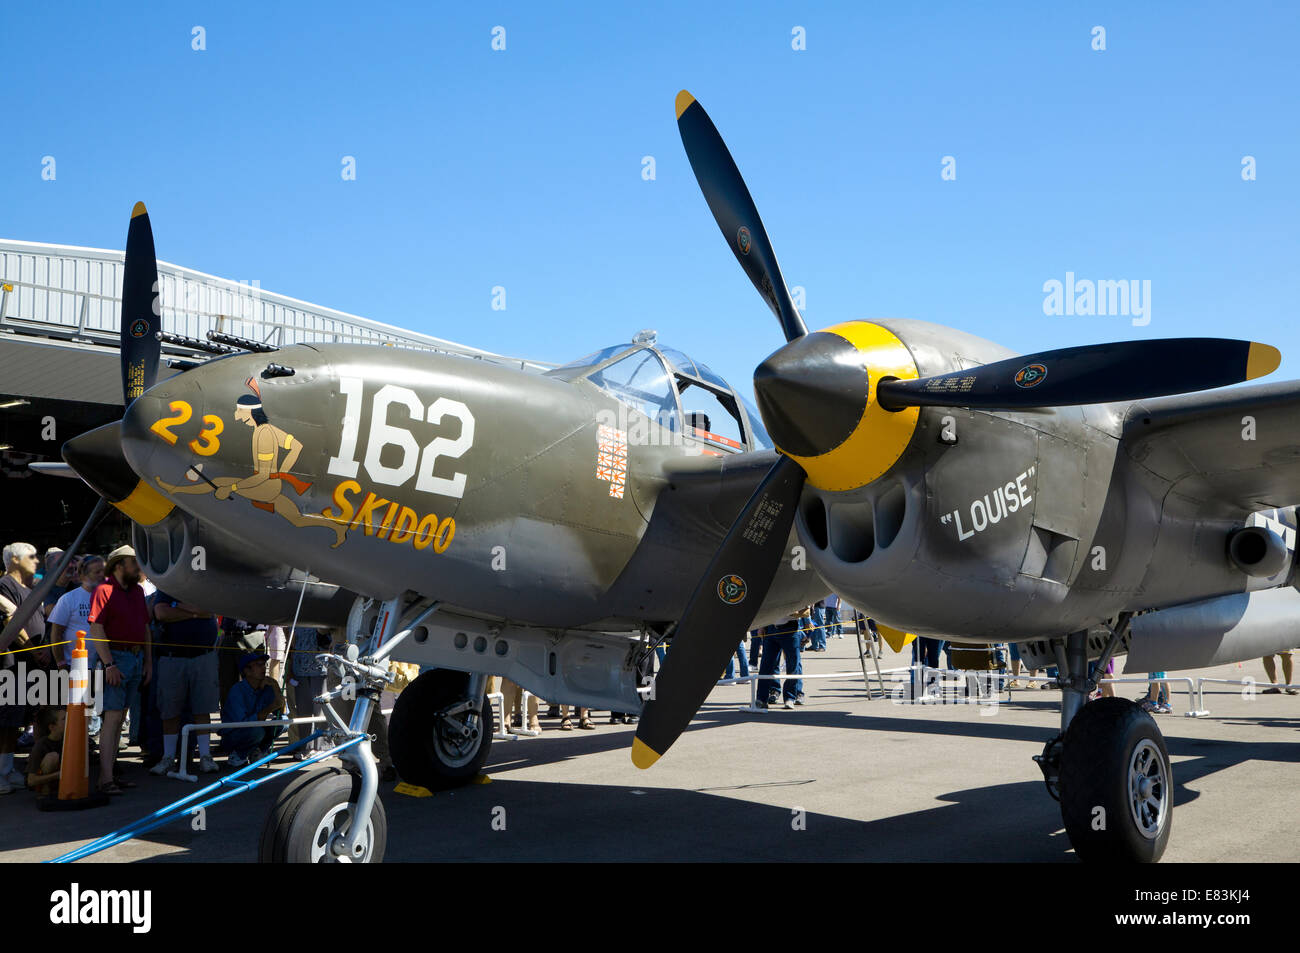 Front view of restored P-38 Lightning at Warbirds Museum, Nampa, Idaho, 2014. Stock Photo